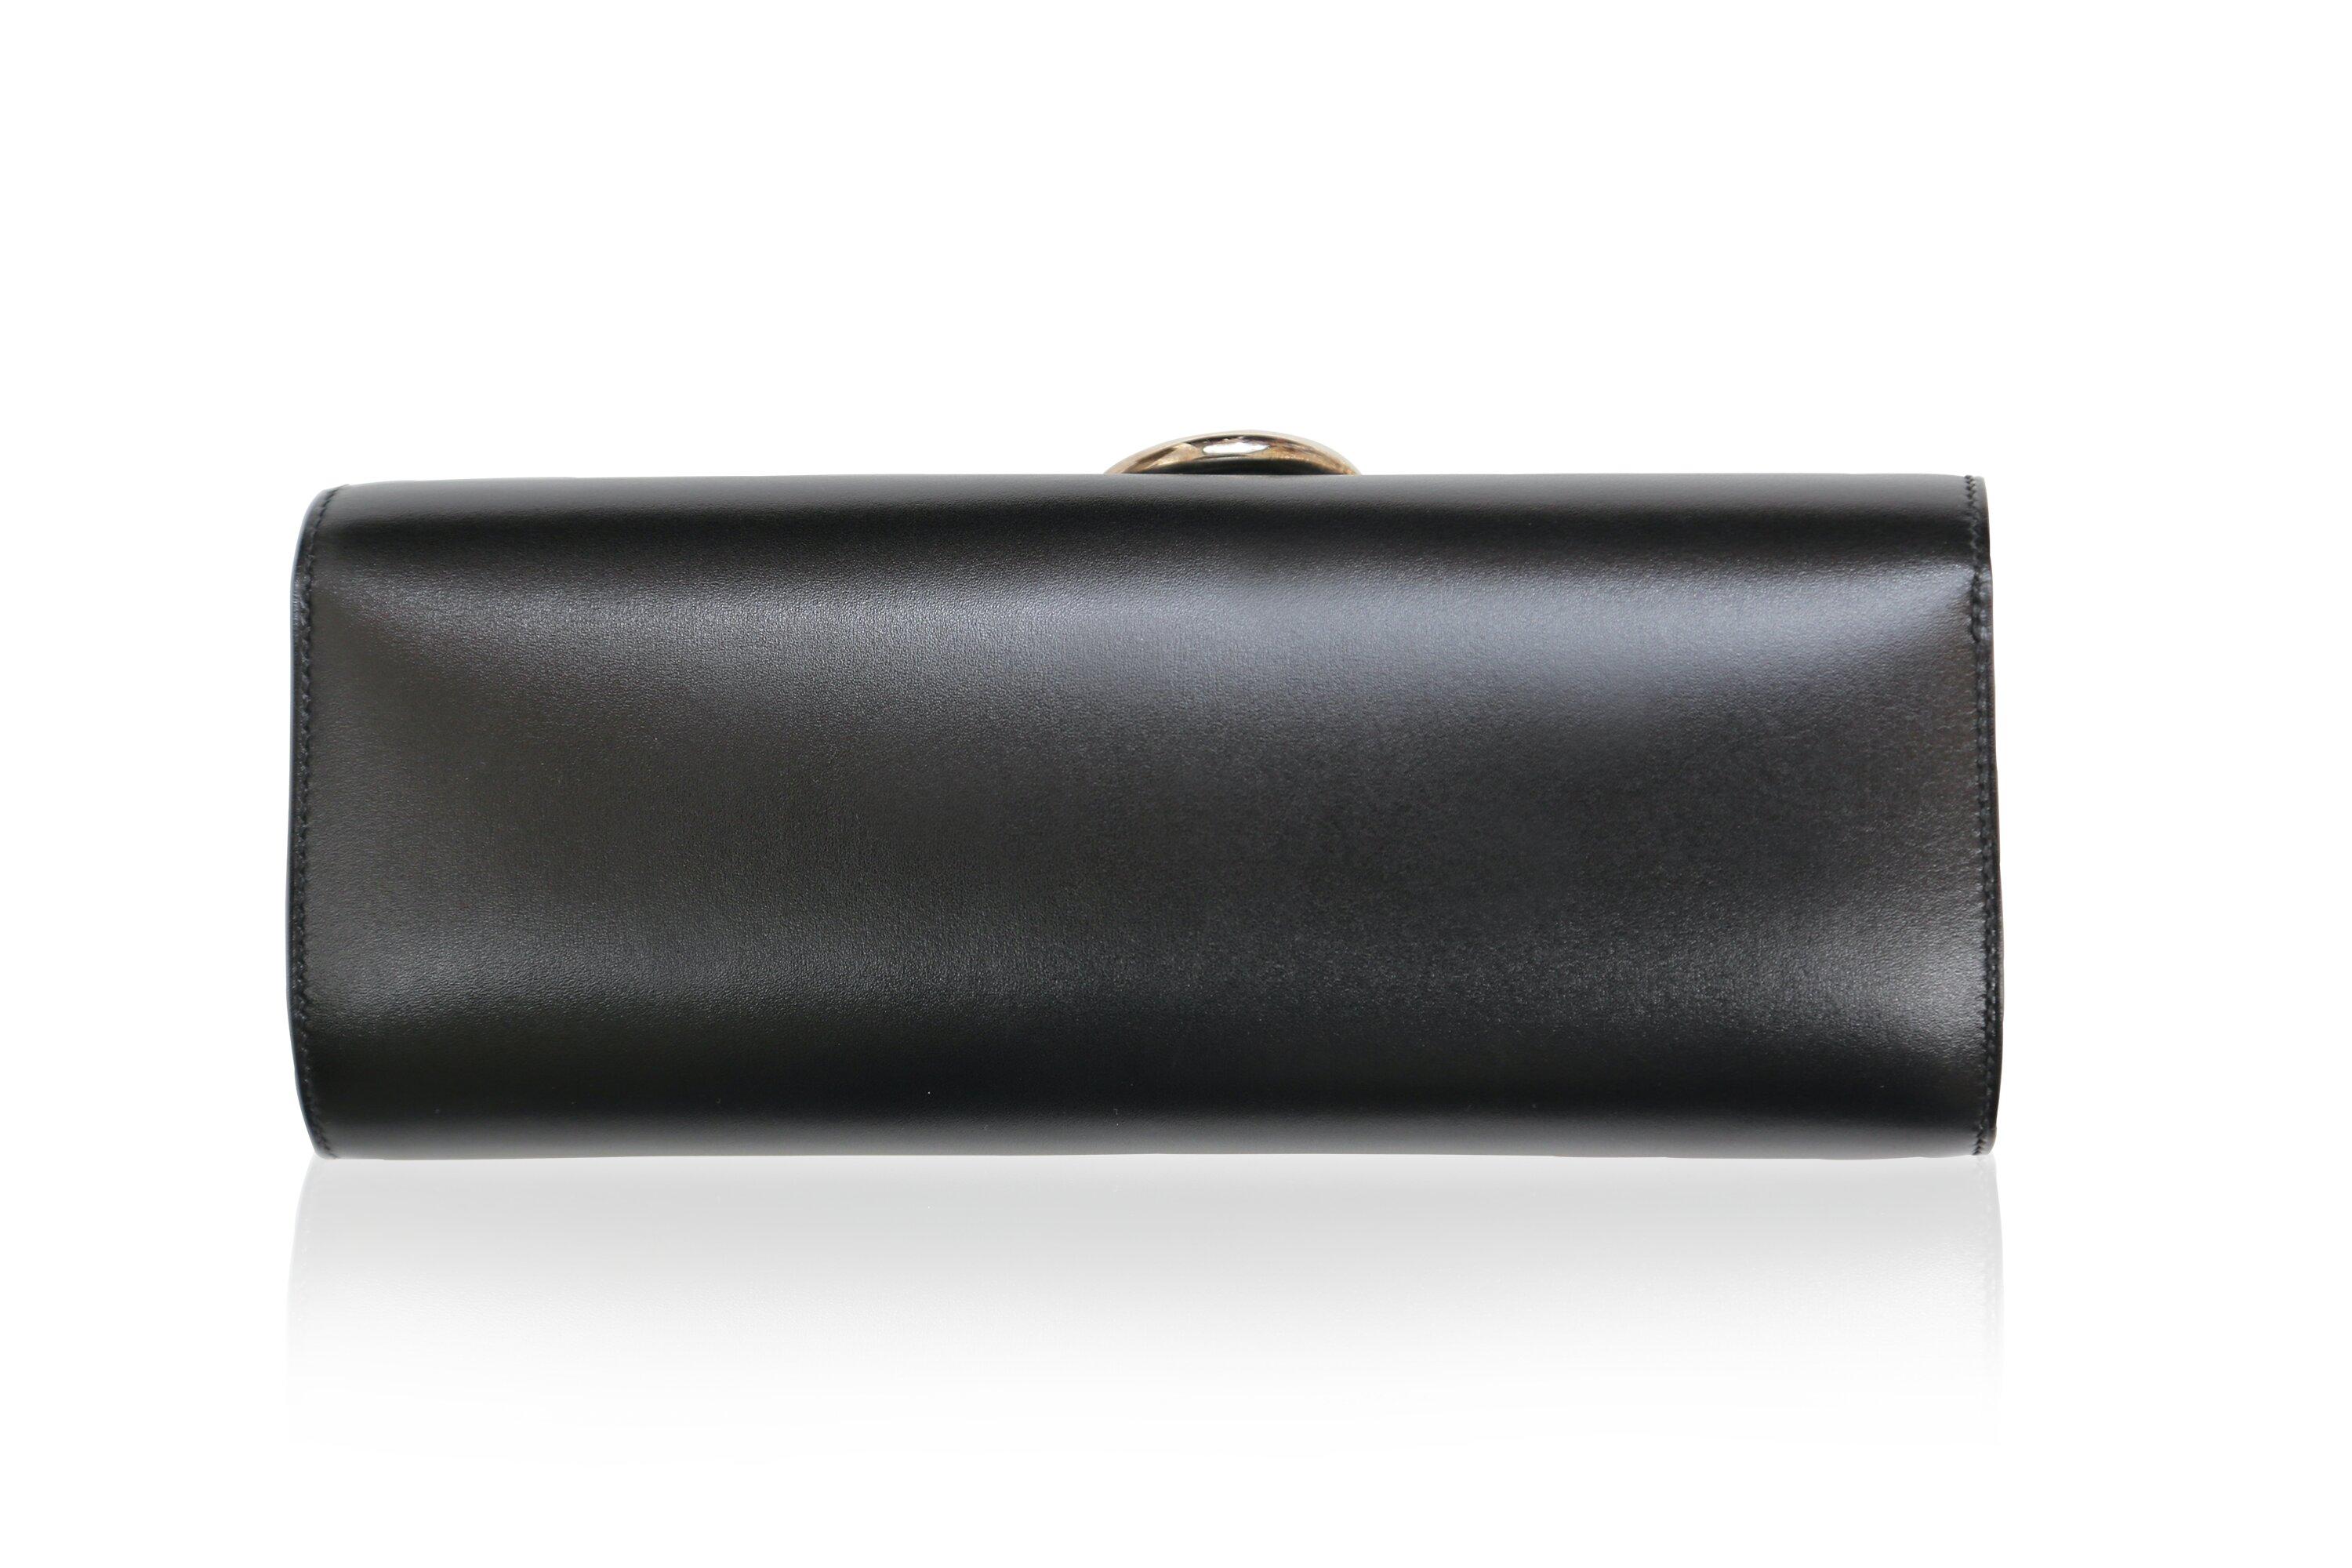 Hermès Egee Black Clutch In Excellent Condition For Sale In London, GB